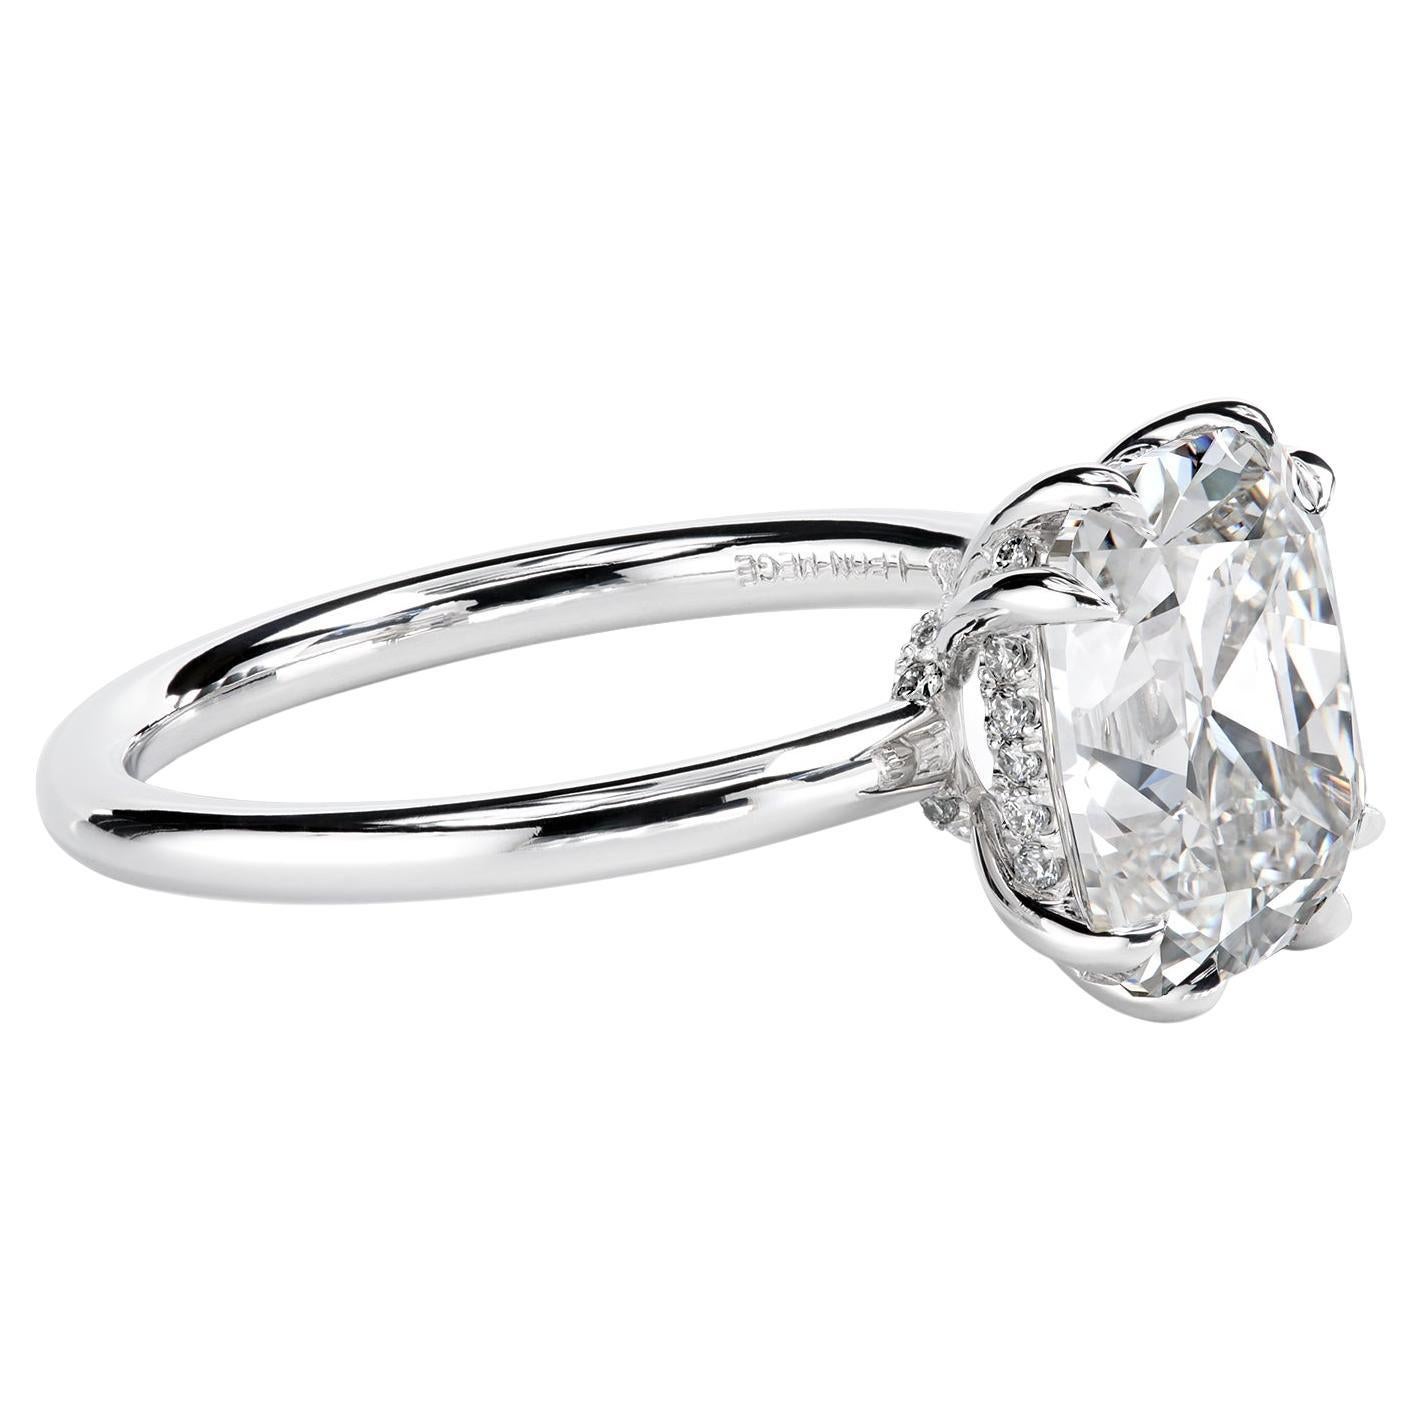 Leon Mege platinum hand-forged solitaire features a certified OMC diamond.